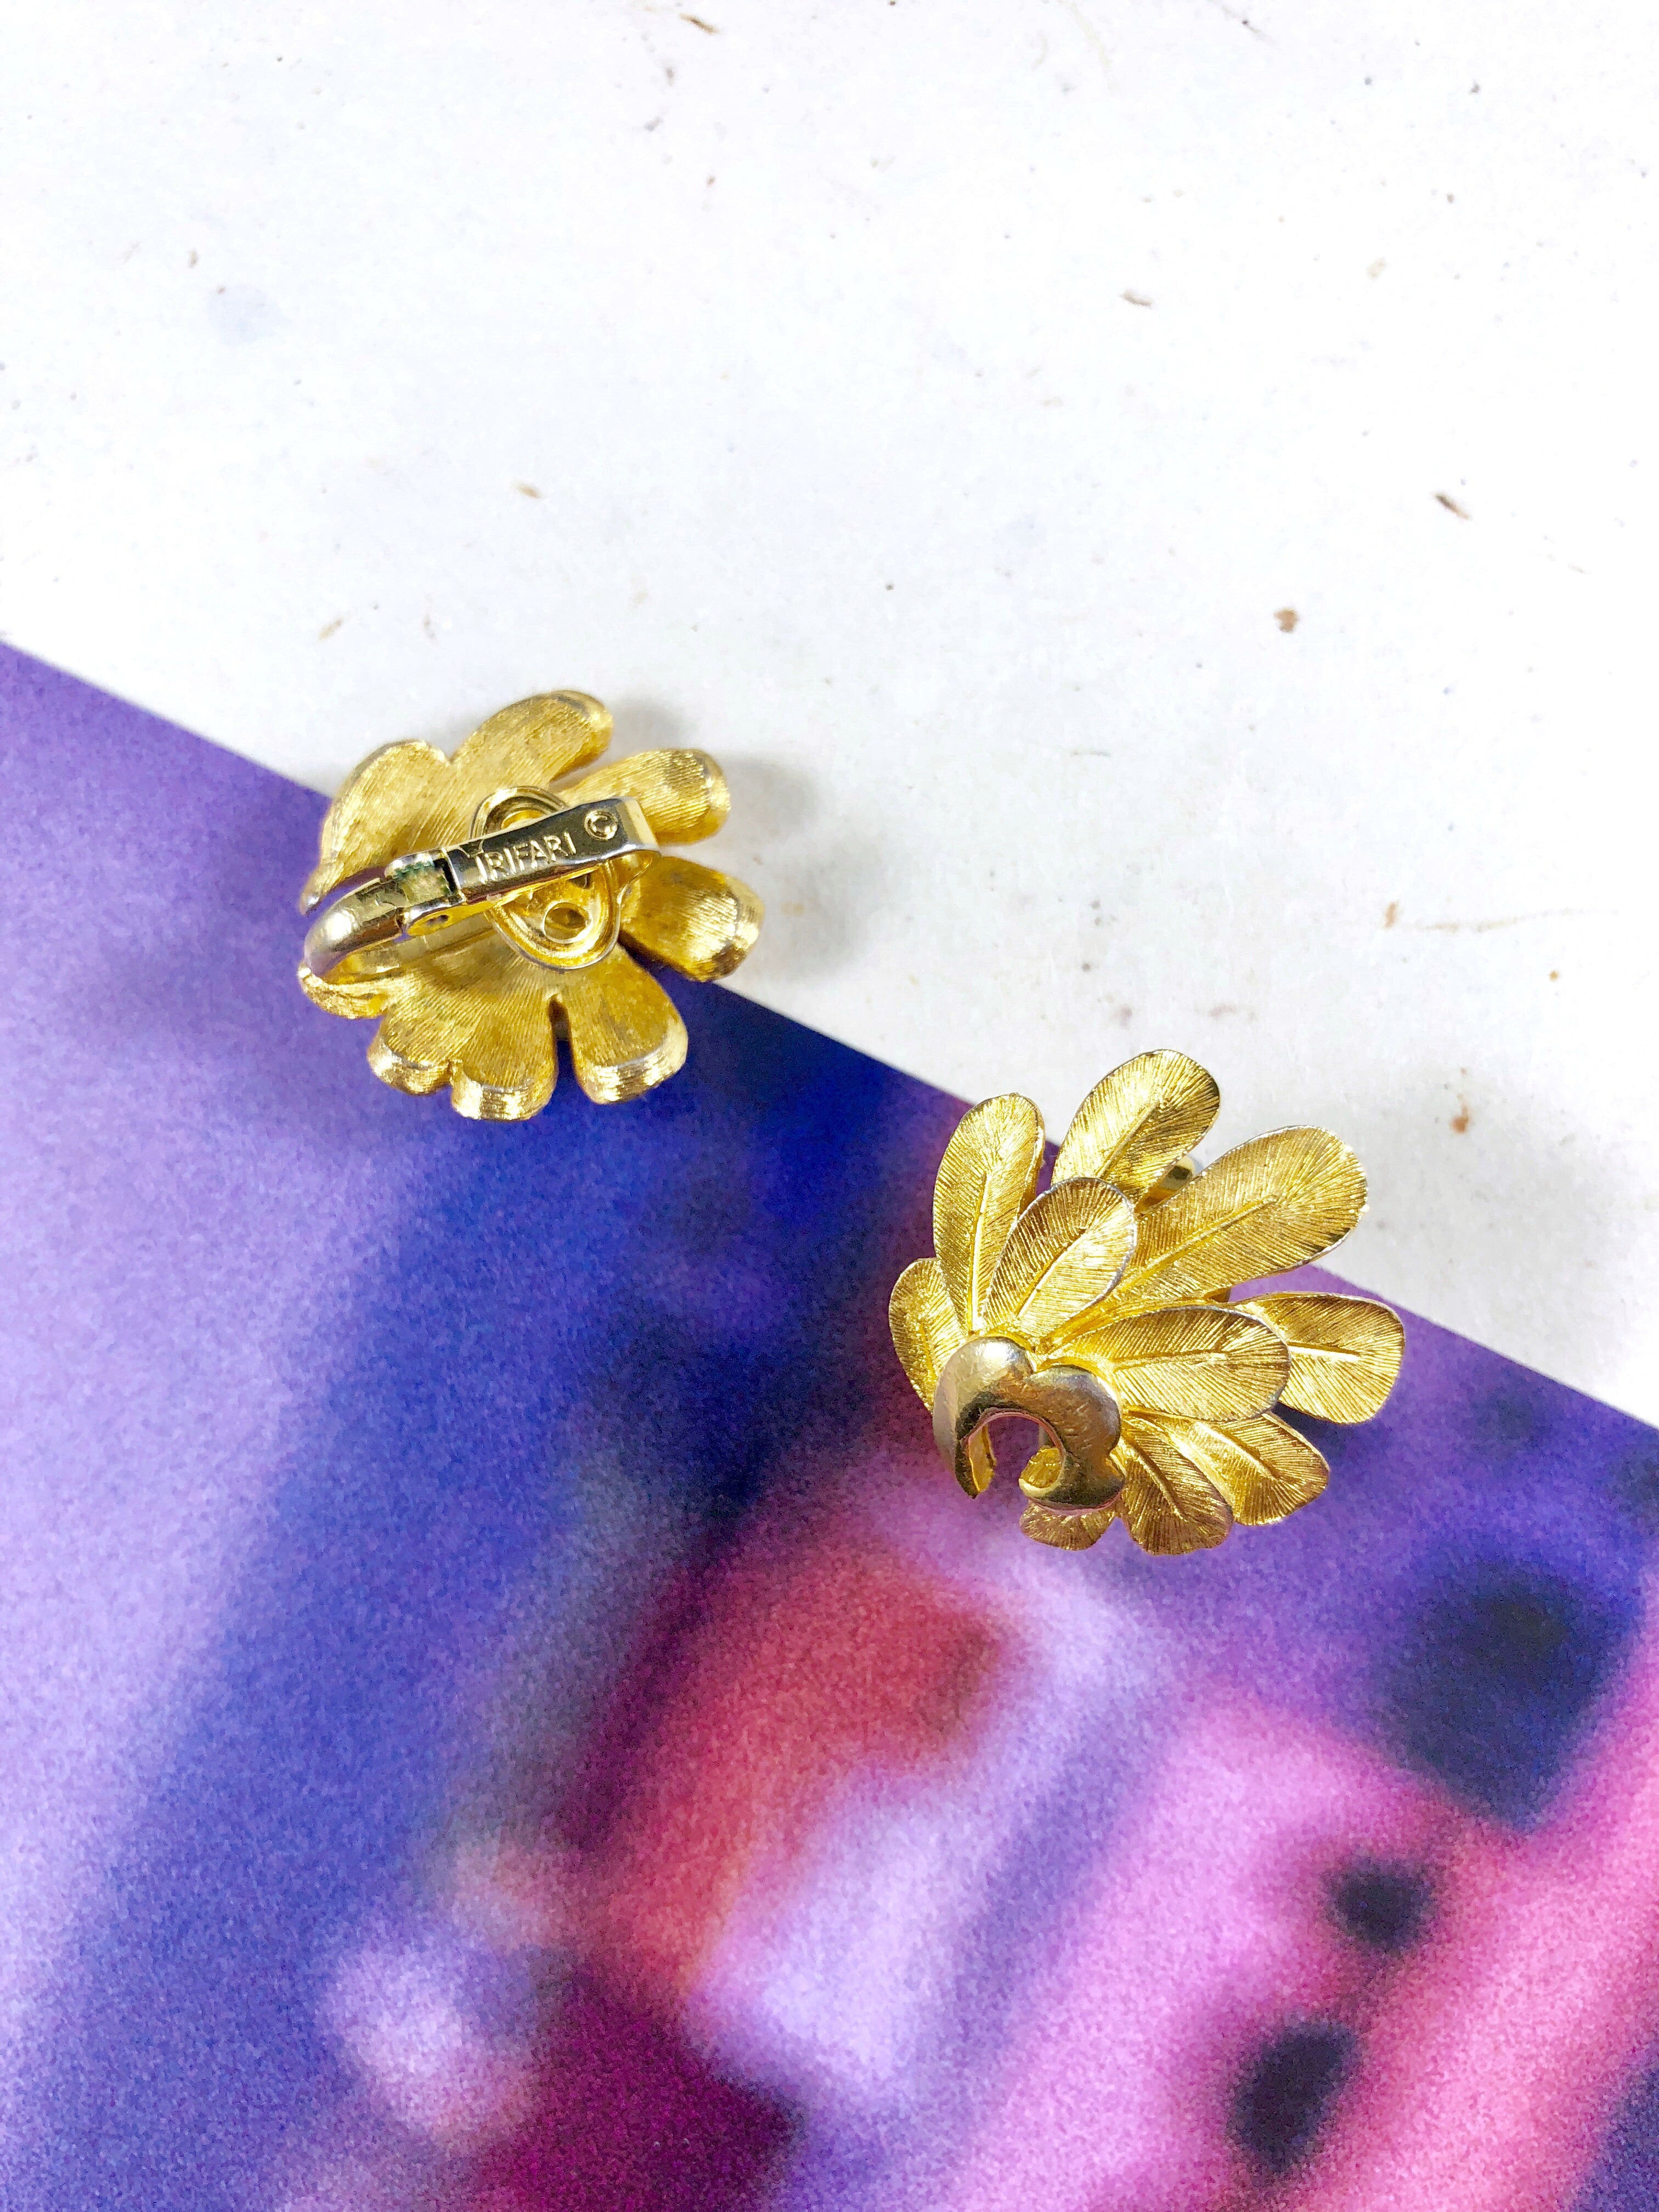 Vintage 70s Trifari Gold Feathers Statement Earrings